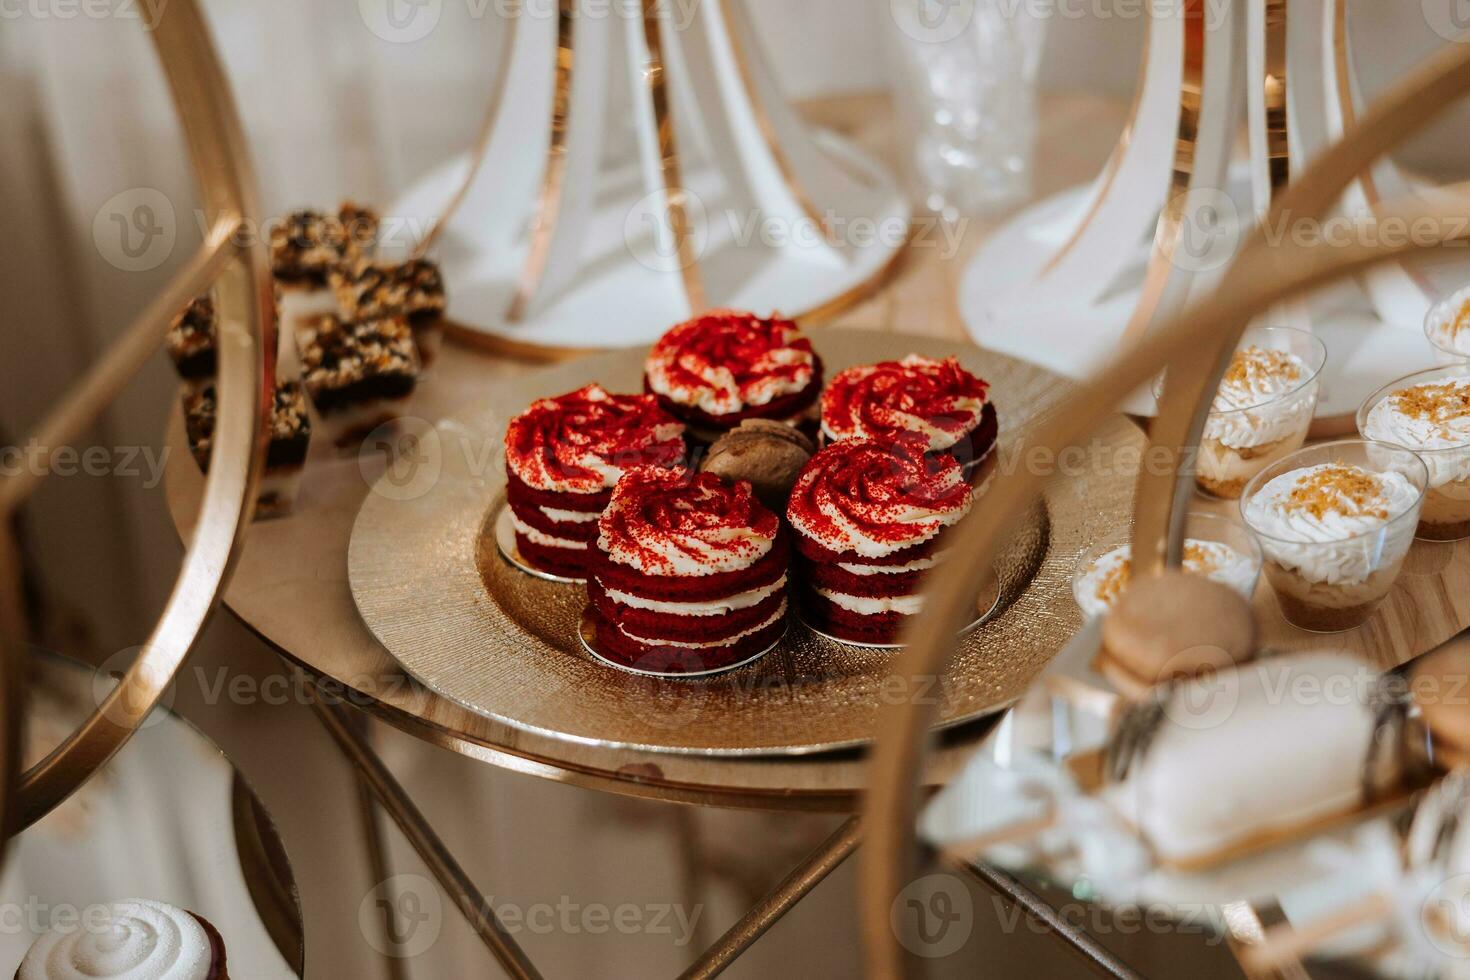 Candy bar. Table with sweets, candies, dessert. cakes and berries in the candy bar. Candy bar with delicious mini cakes, selective focus photo